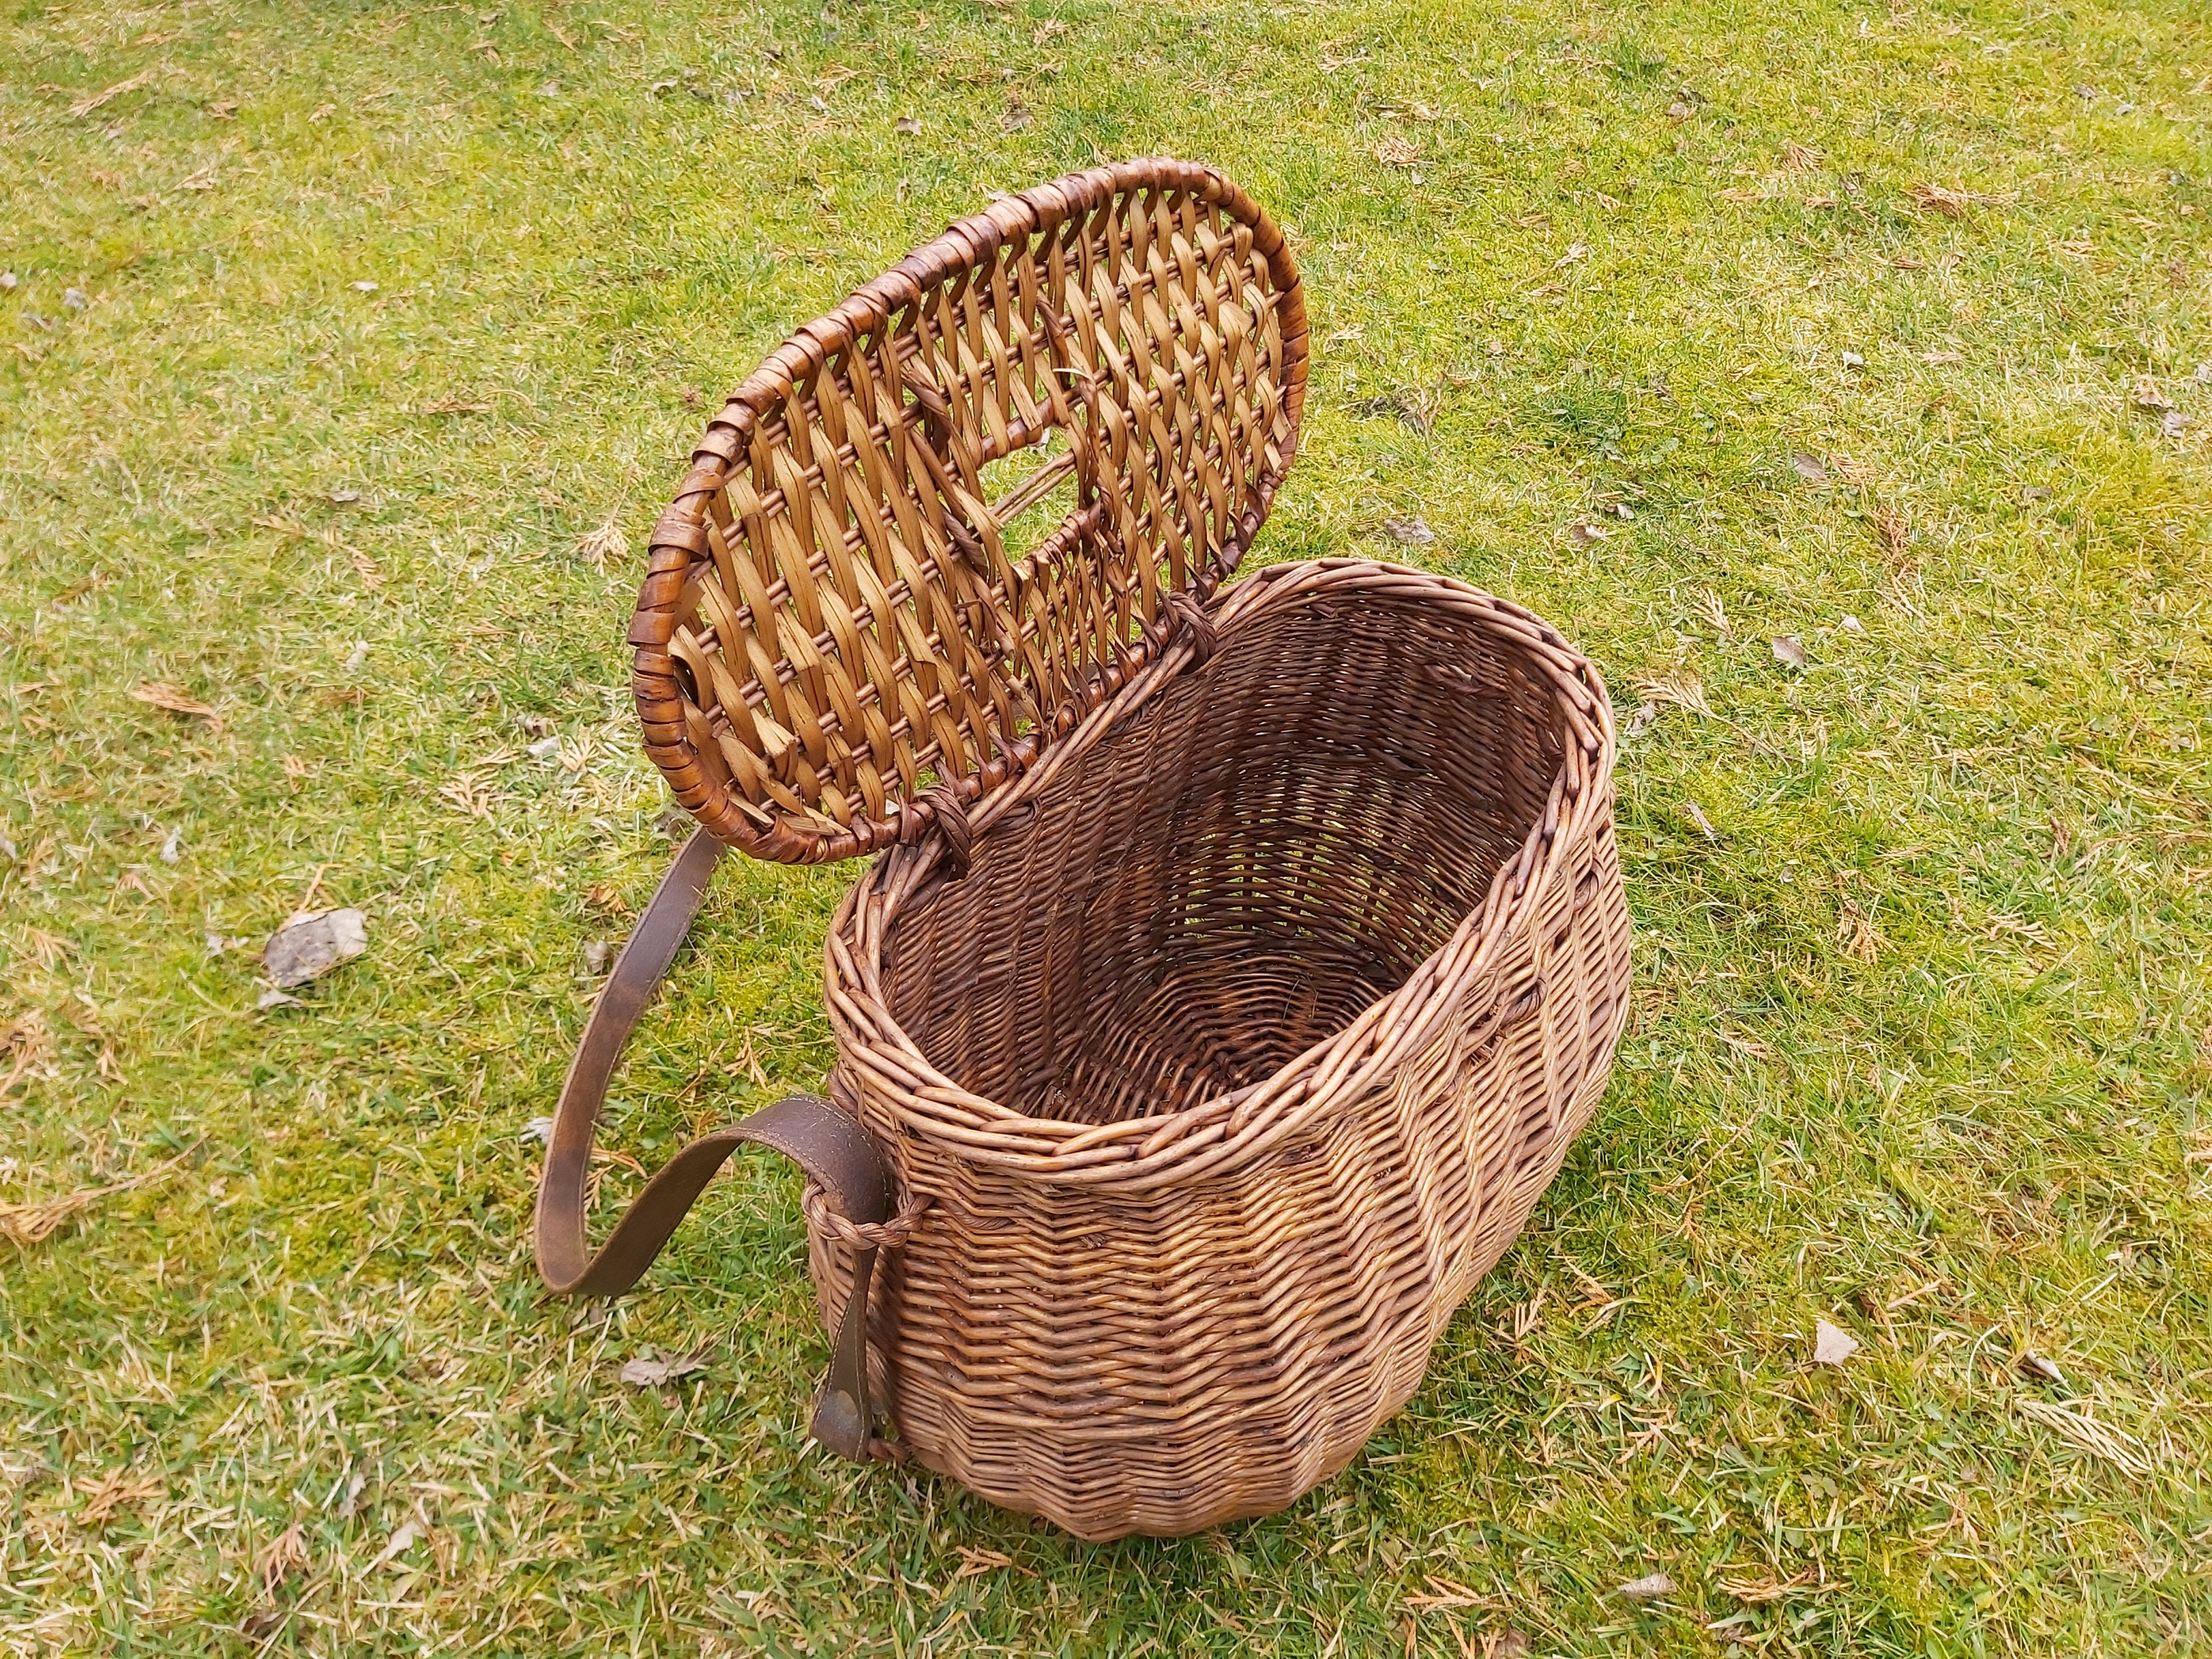 Fishing Willow Creel Basket Wicker Fisherman Trap Cage Fish Case Export Quality 